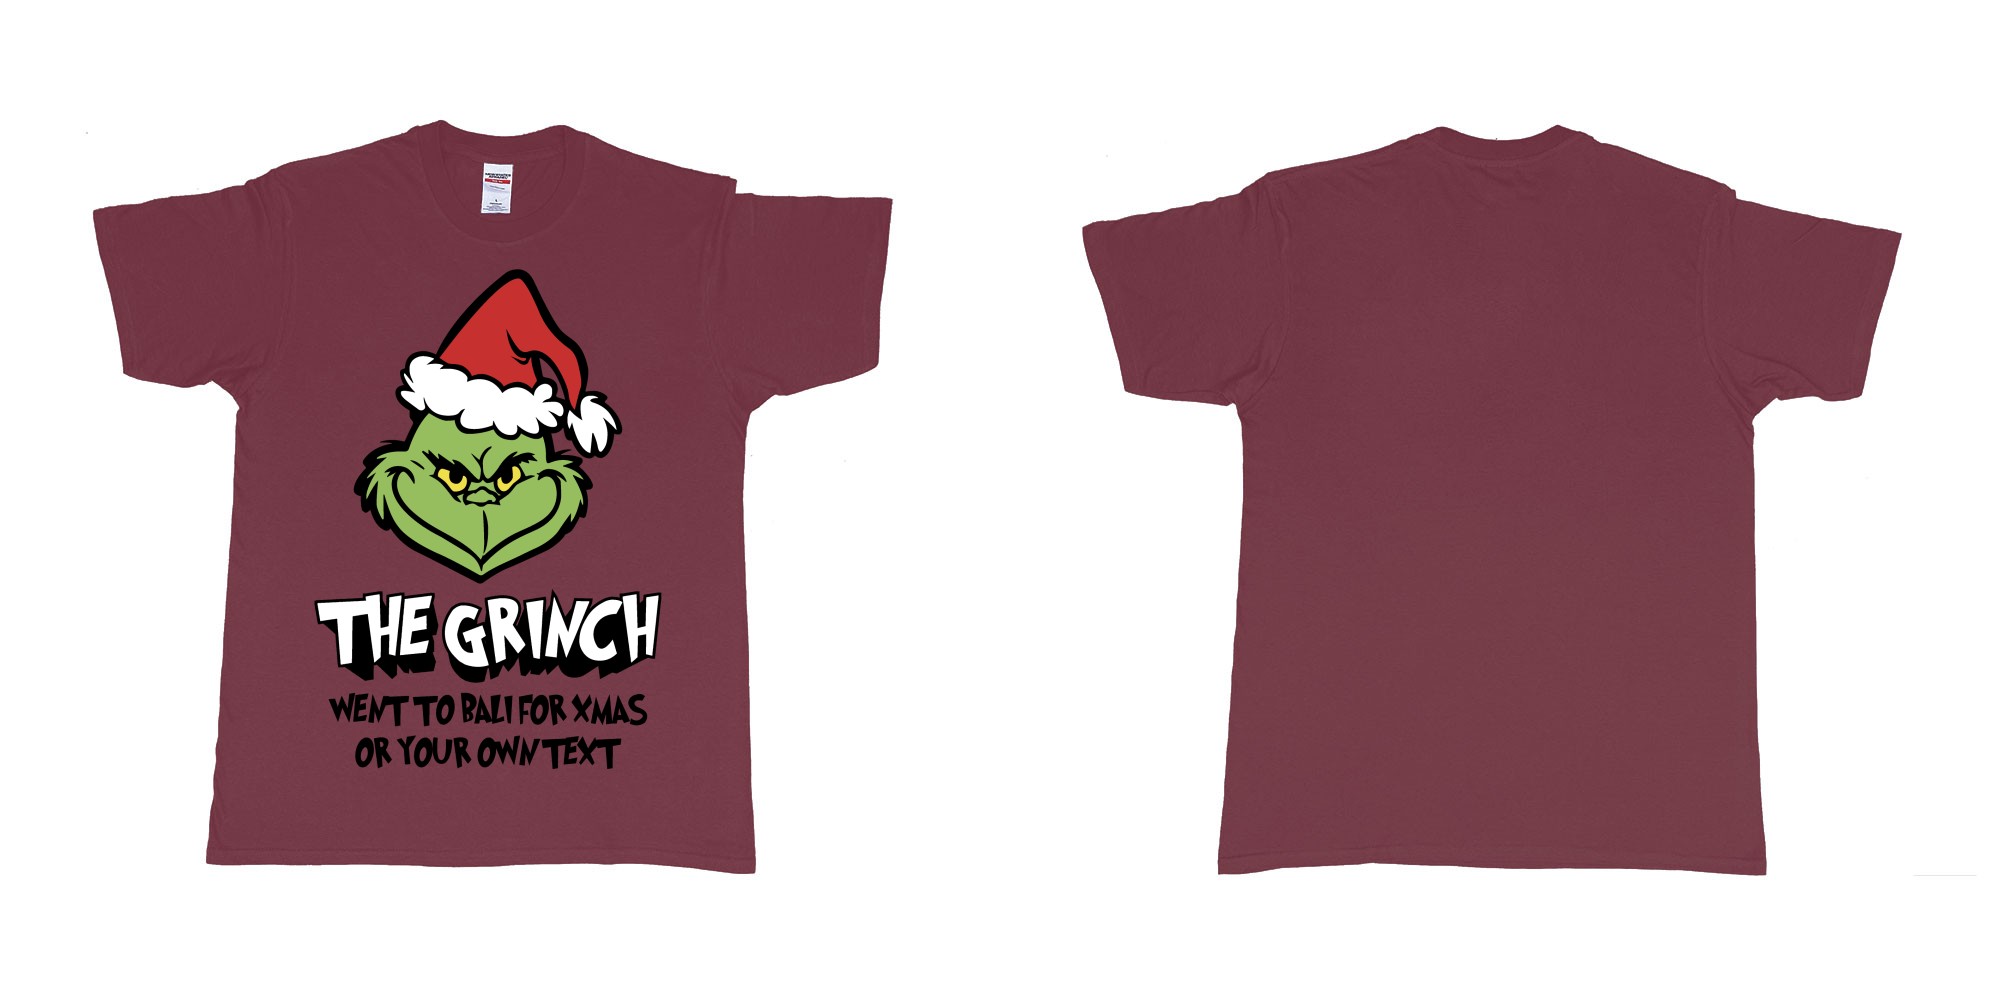 Custom tshirt design the grinch went to bali for xmas tshirt in fabric color marron choice your own text made in Bali by The Pirate Way